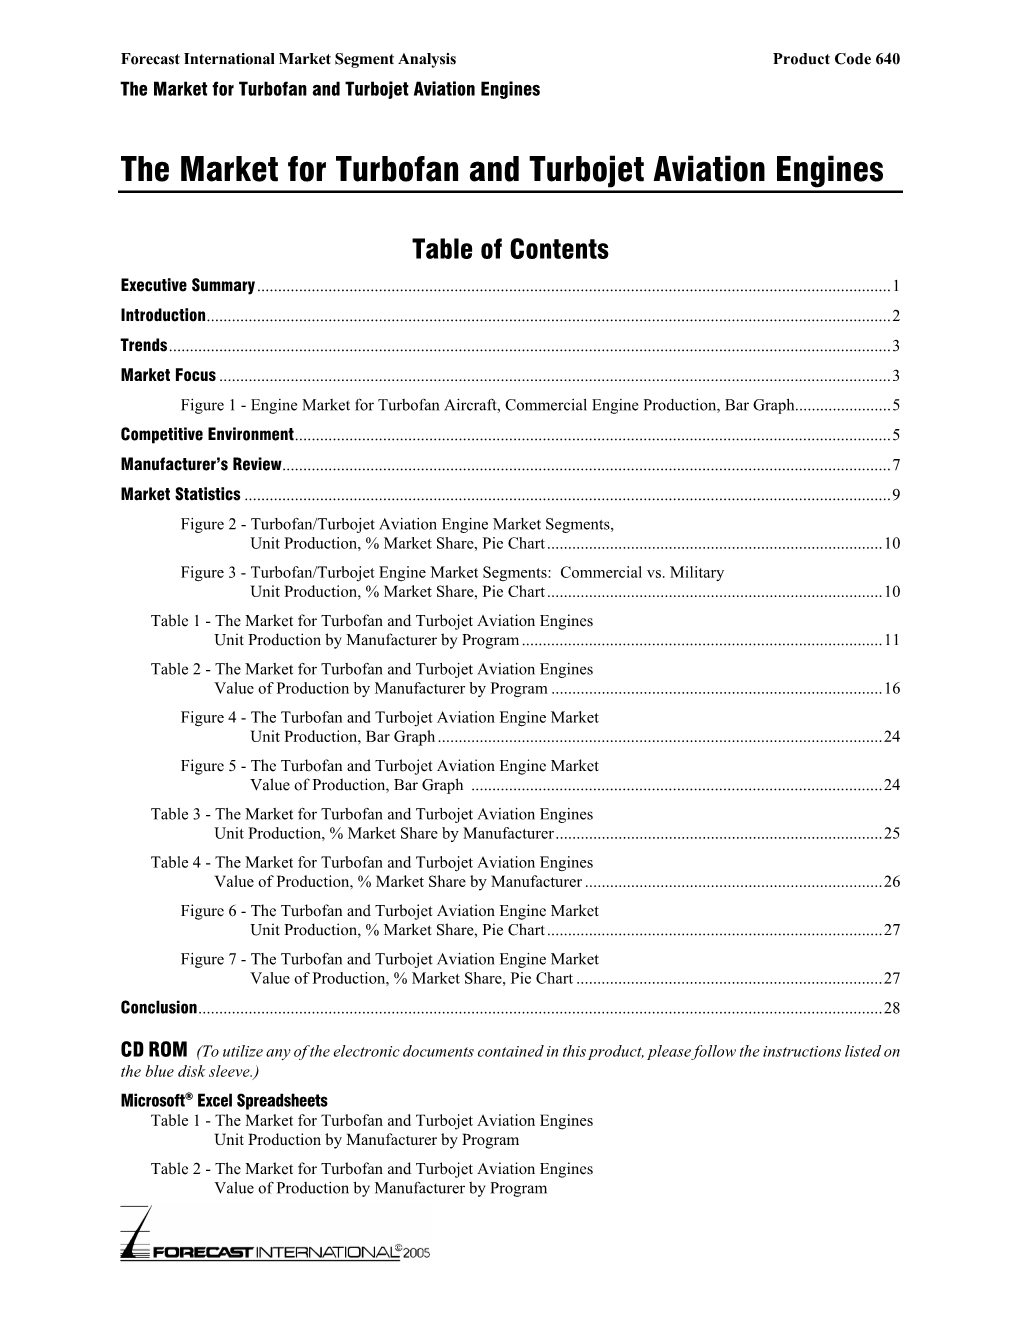 The Market for Turbofan and Turbojet Aviation Engines